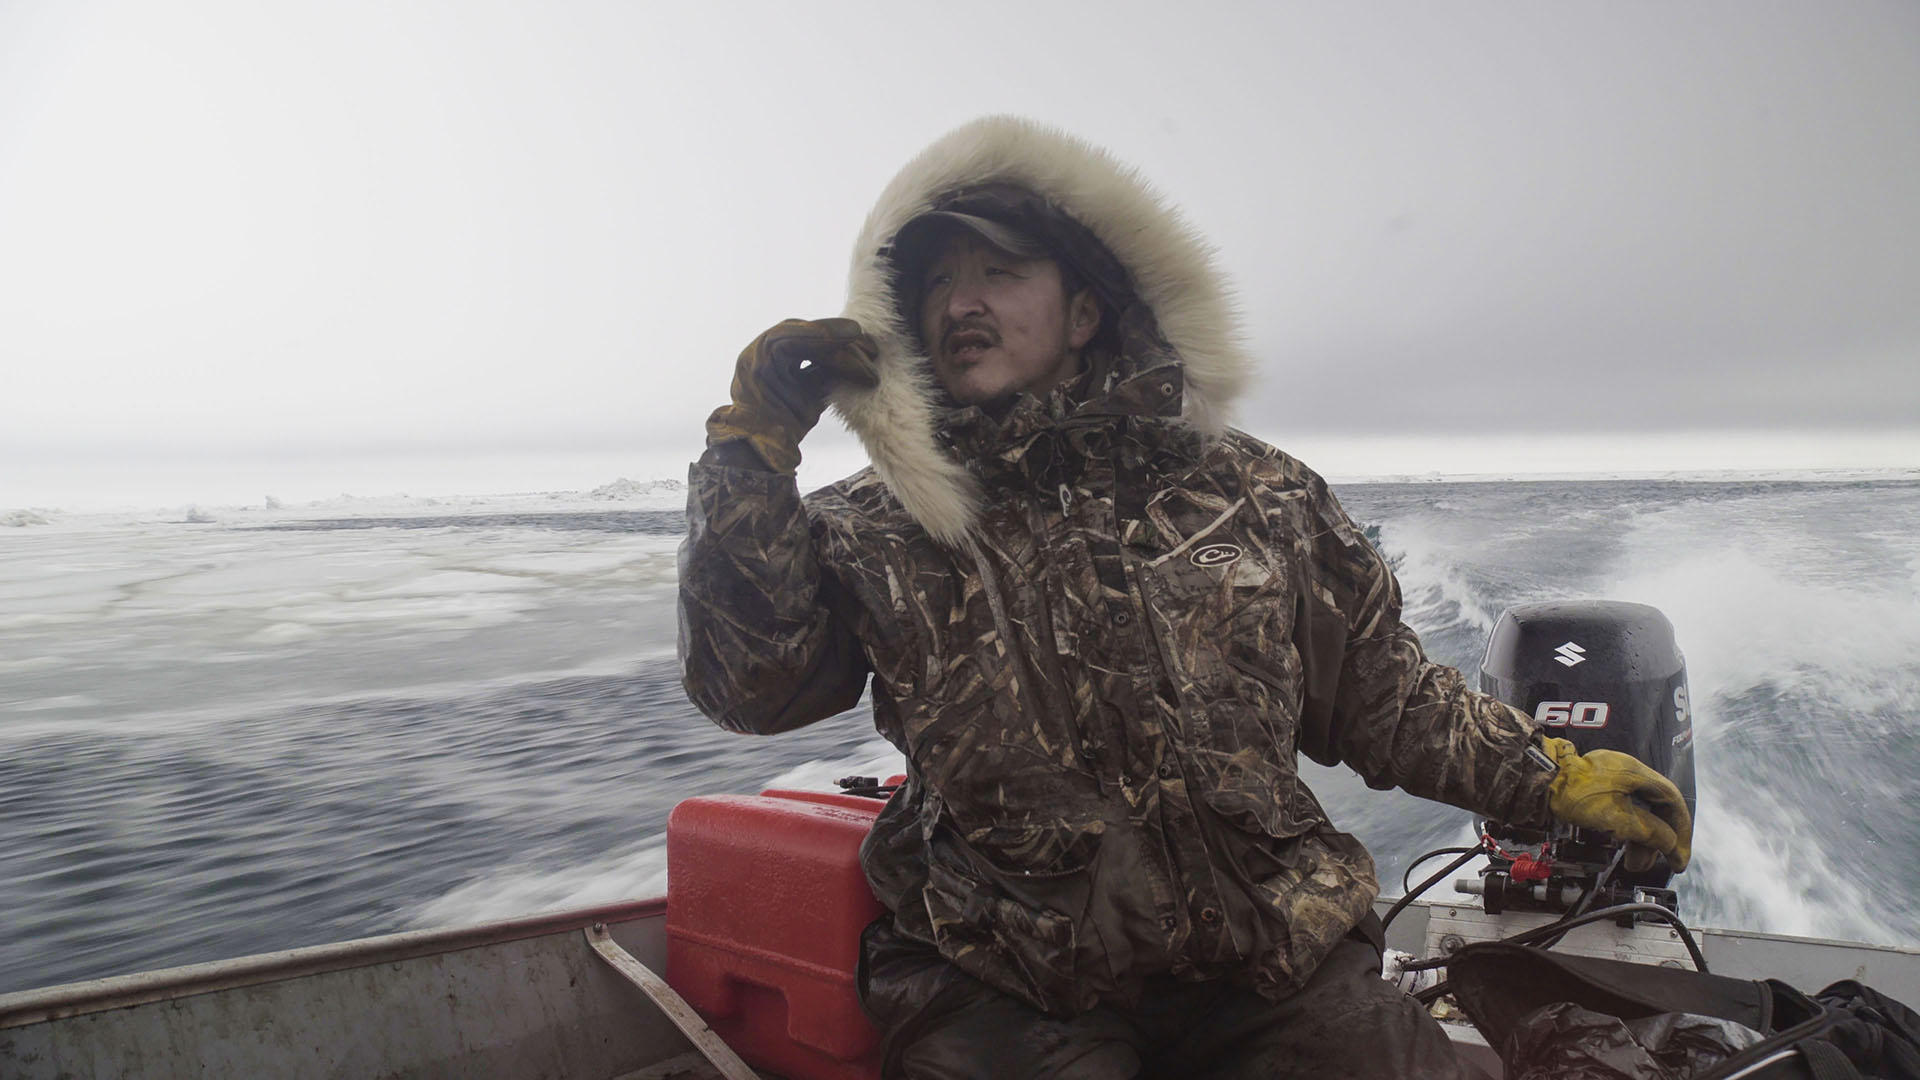 A Native Alaskan man wearing a thick hooded winter jacket steers a boat on the icy Pacific Ocean.